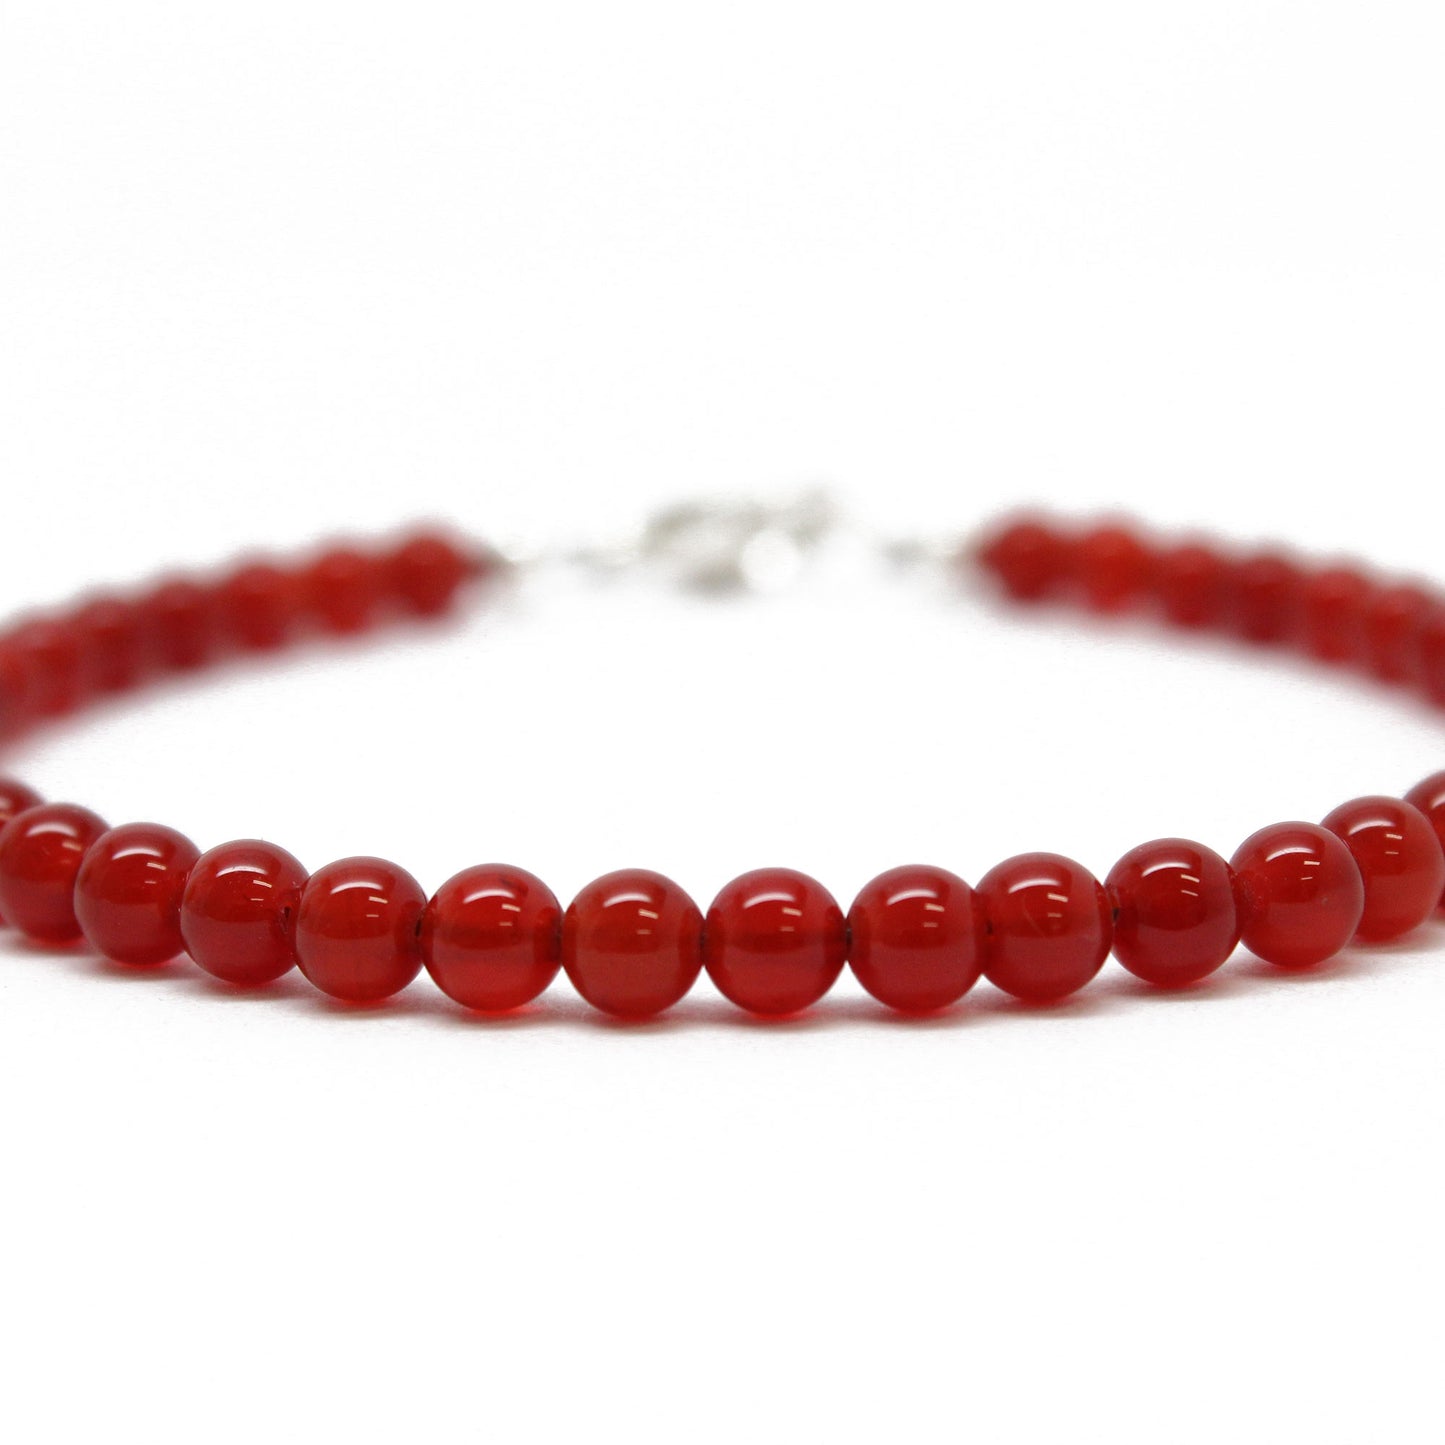 Buy Carnelian Bracelet Natural Crystal Stone 6 mm Beads Bracelet Round  Shape for Reiki Healing and Crystal Healing Stone (Color : Orange / Red) |  Globally